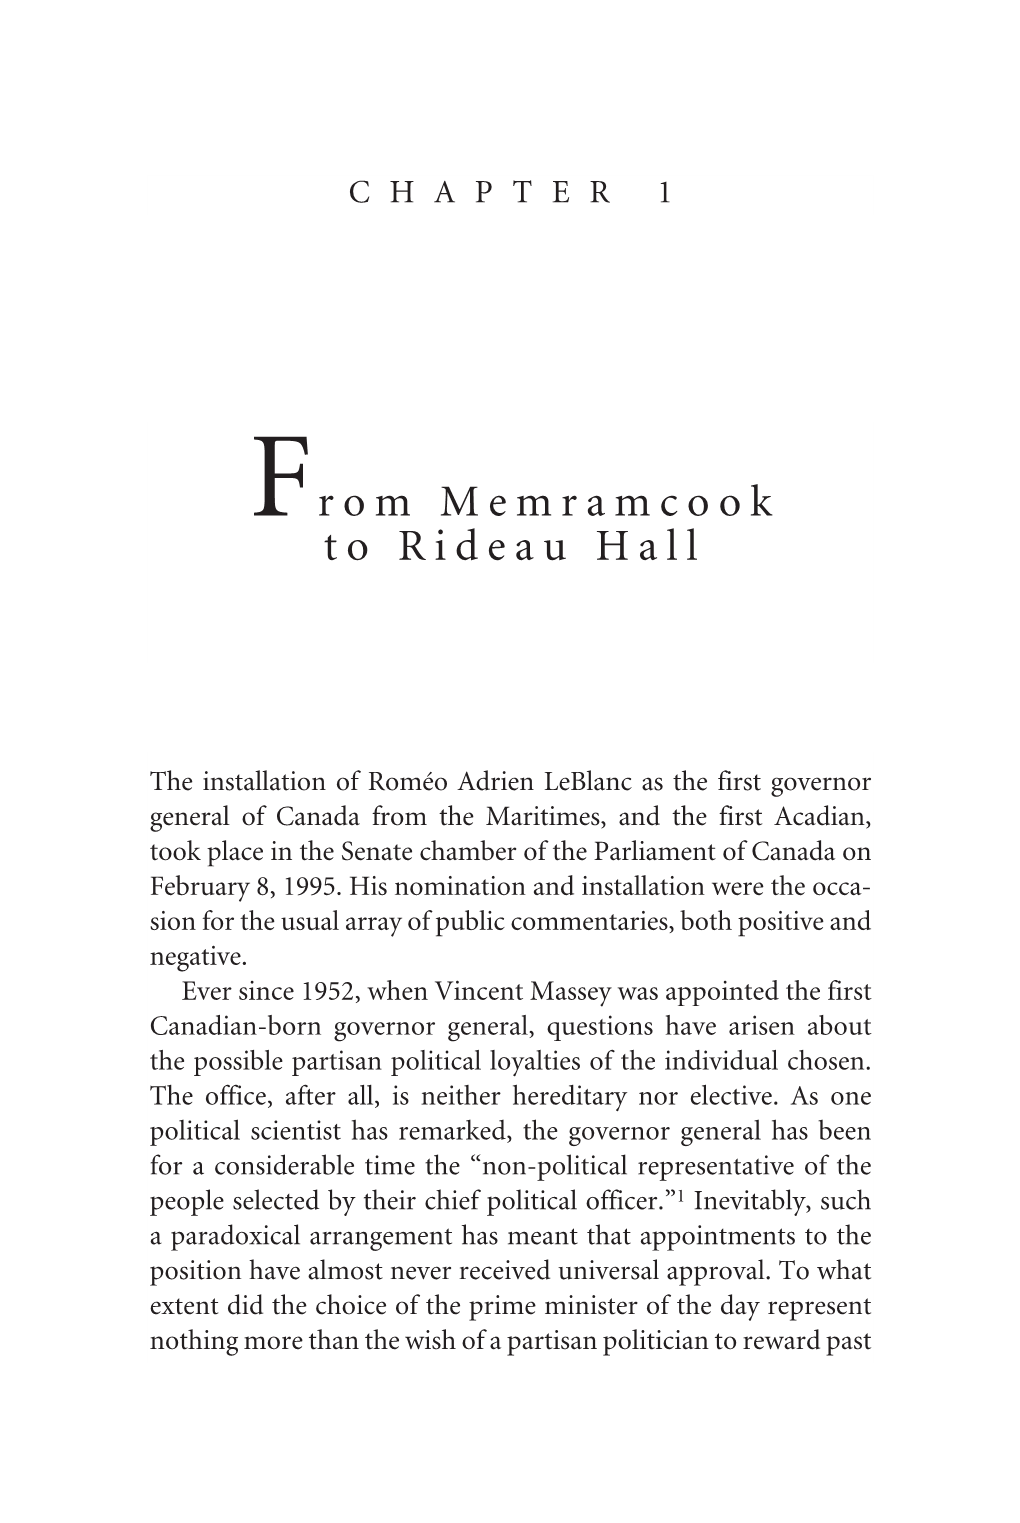 From Memramcook to Rideau Hall 15